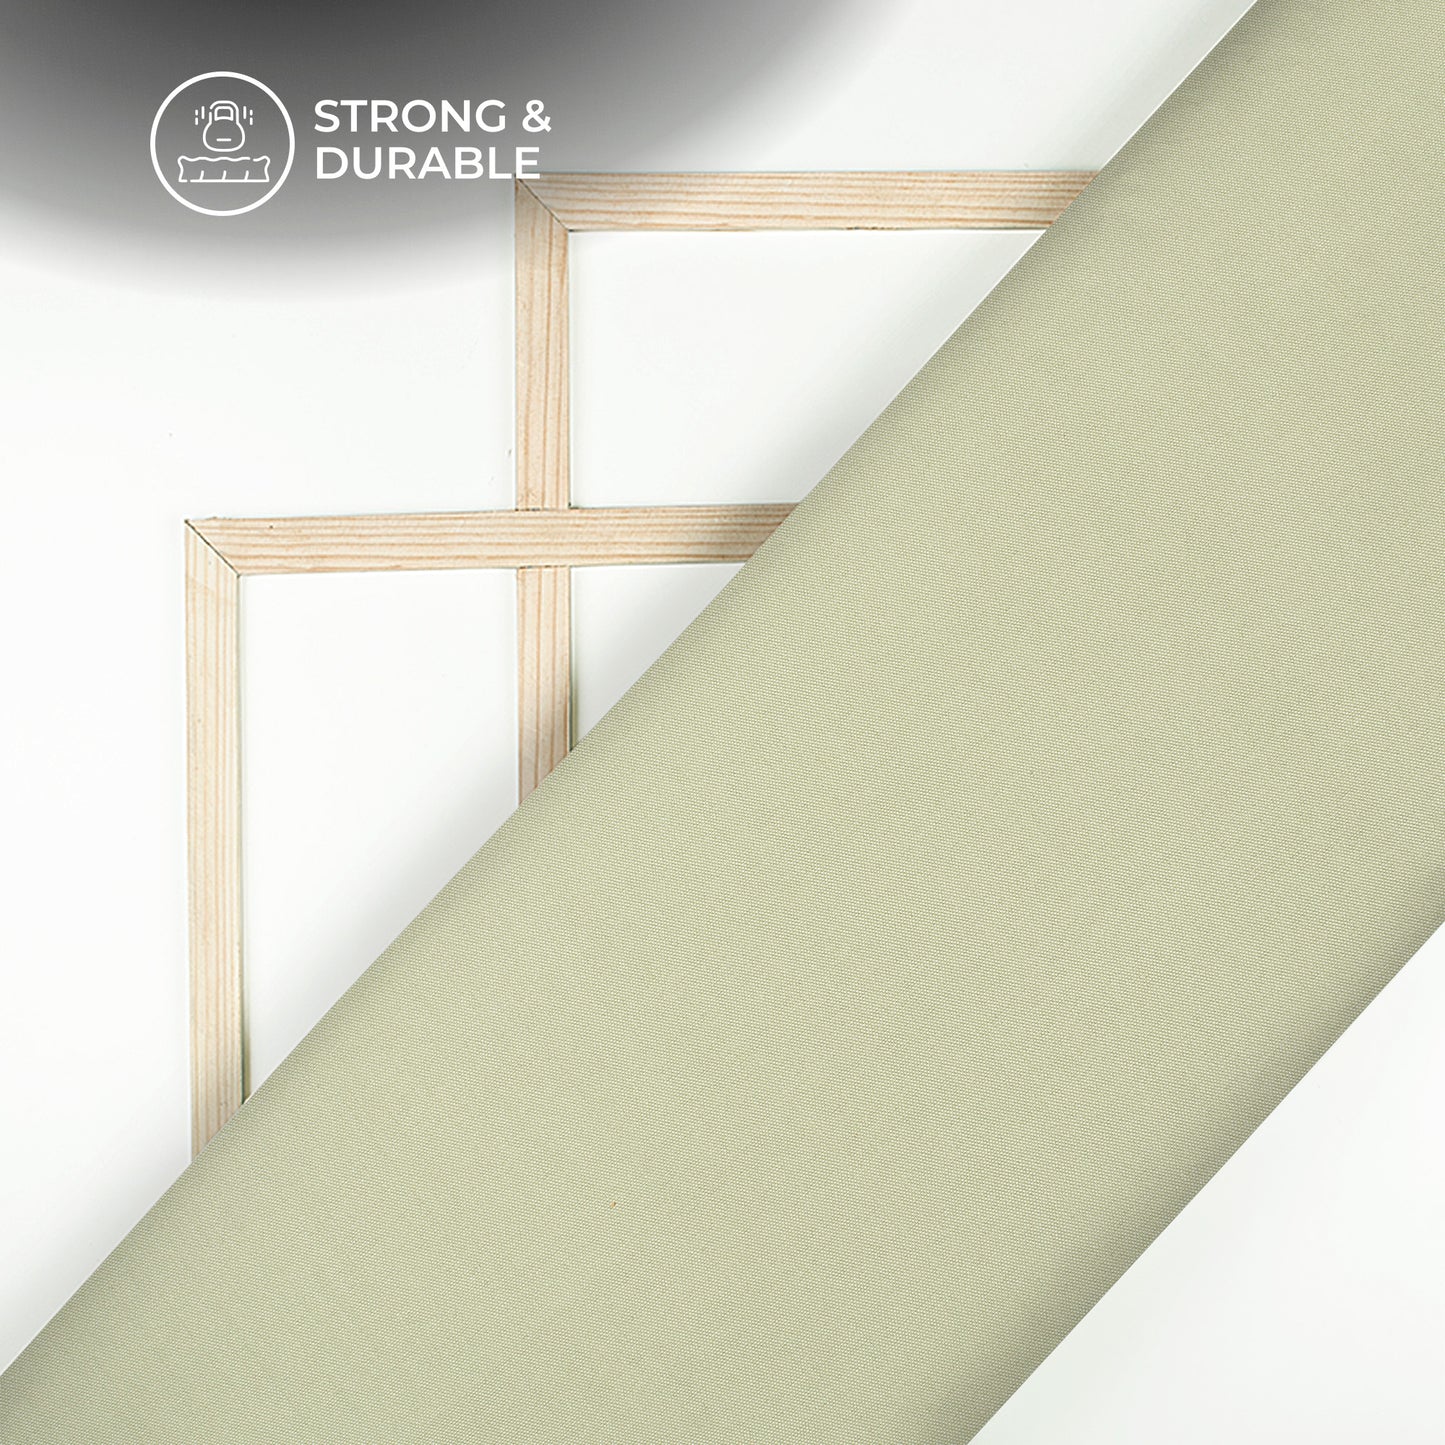 Pistachio Green Plain Soft Touch Cotton Shirting Fabric (Width 58 Inches)